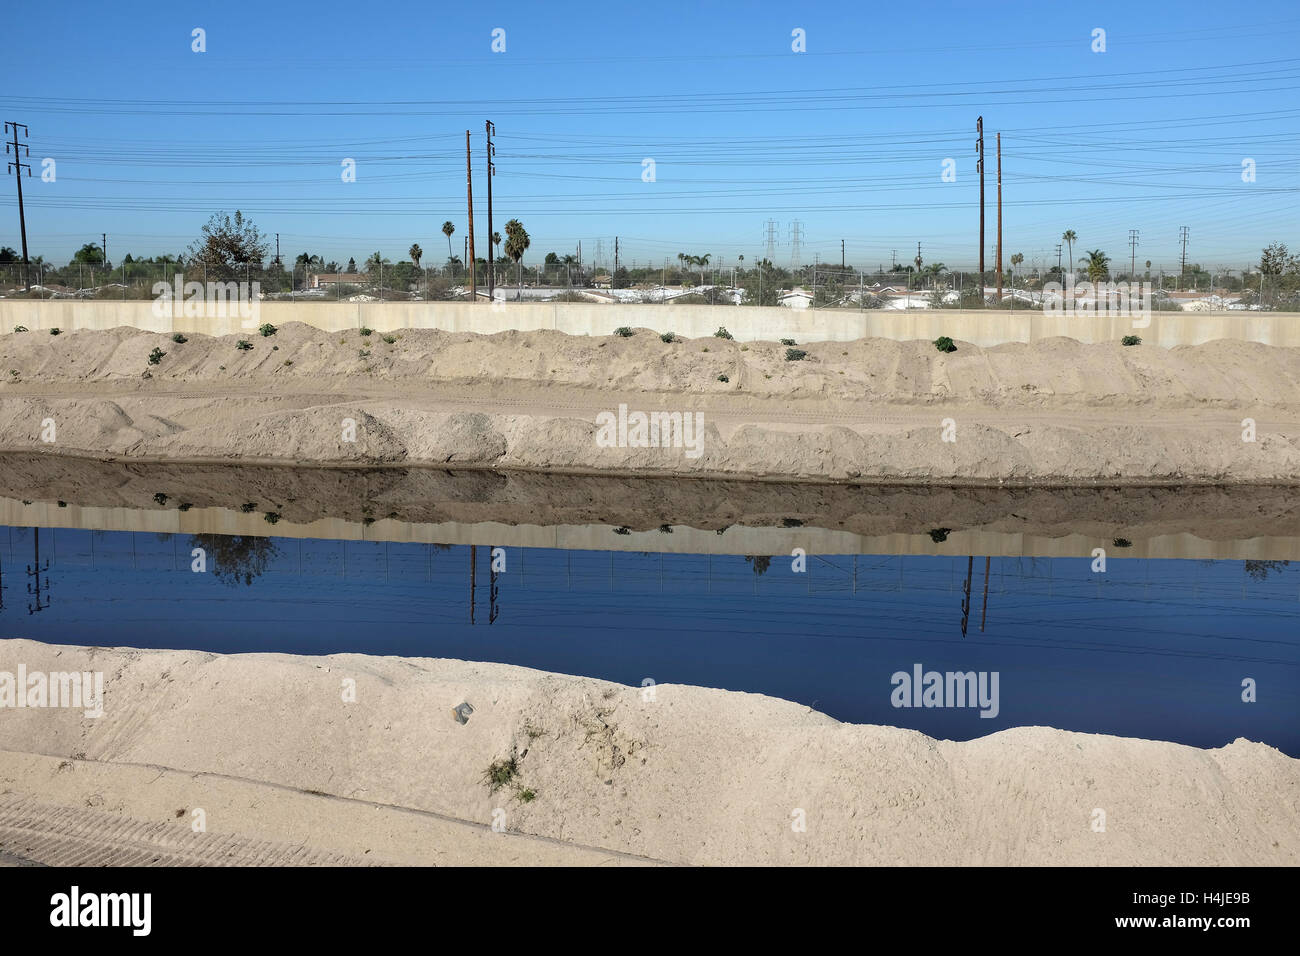 Santa Ana River is Orange County, California, Crews clean sand from the concrete lined water way. The sand is reclaimed. Stock Photo